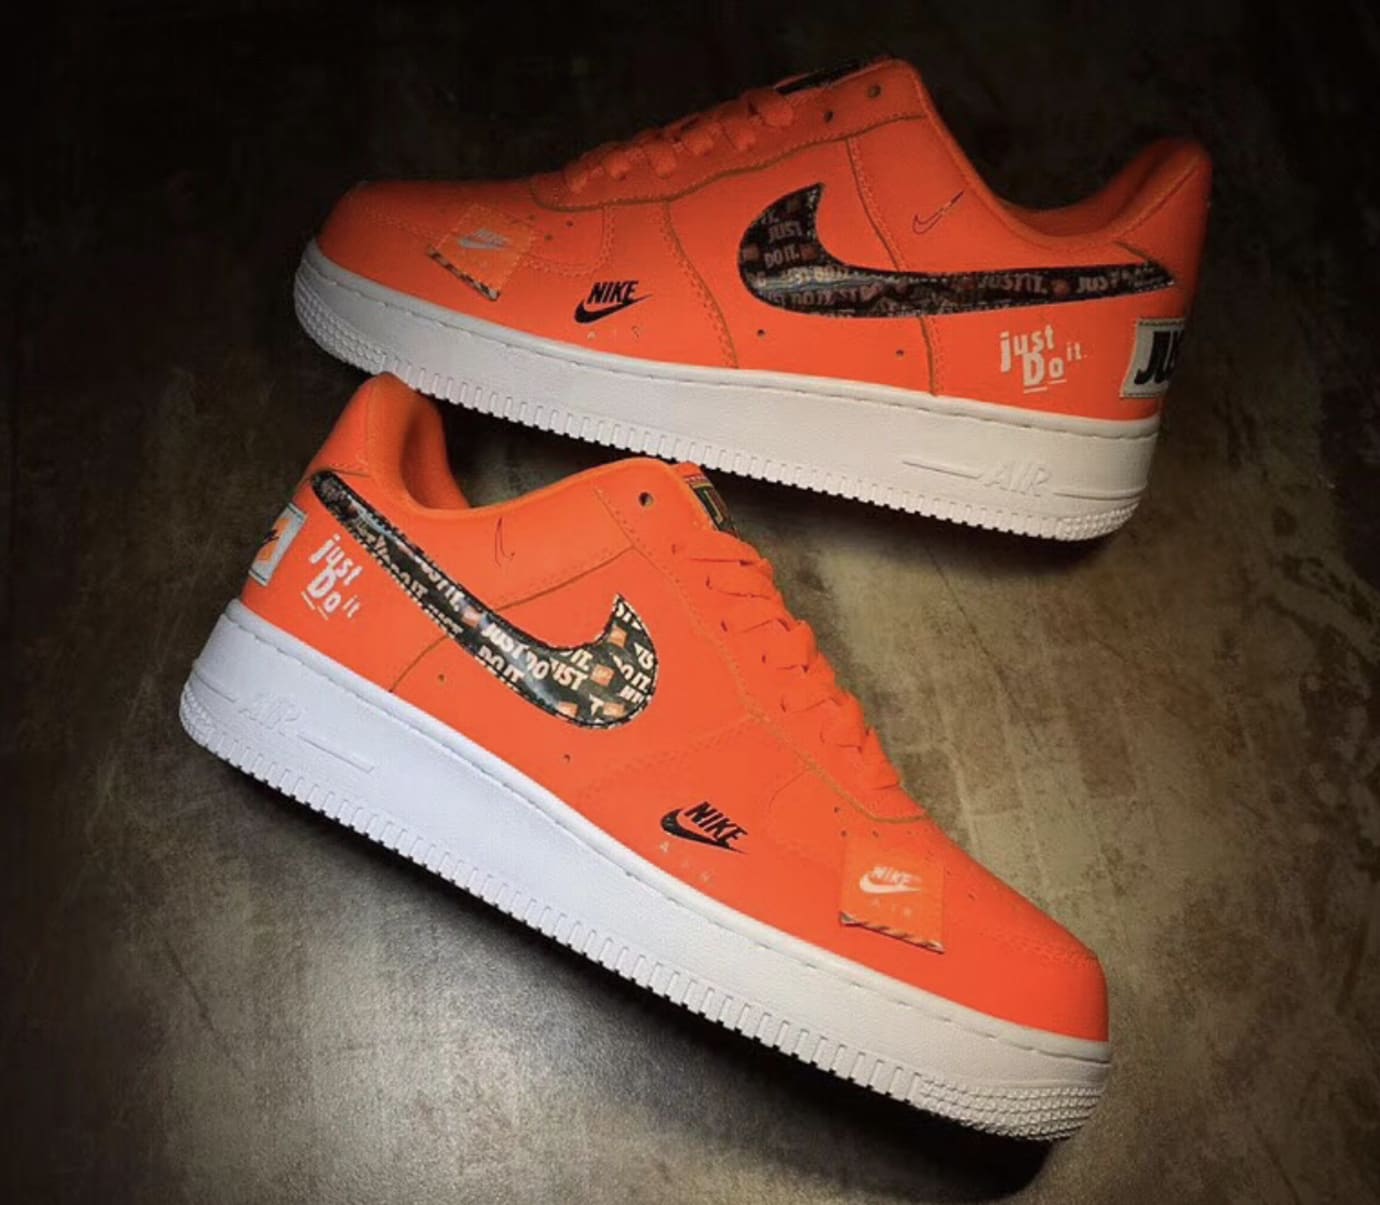 Nike Air Force 1 'Just Do It' Pack (Pair)